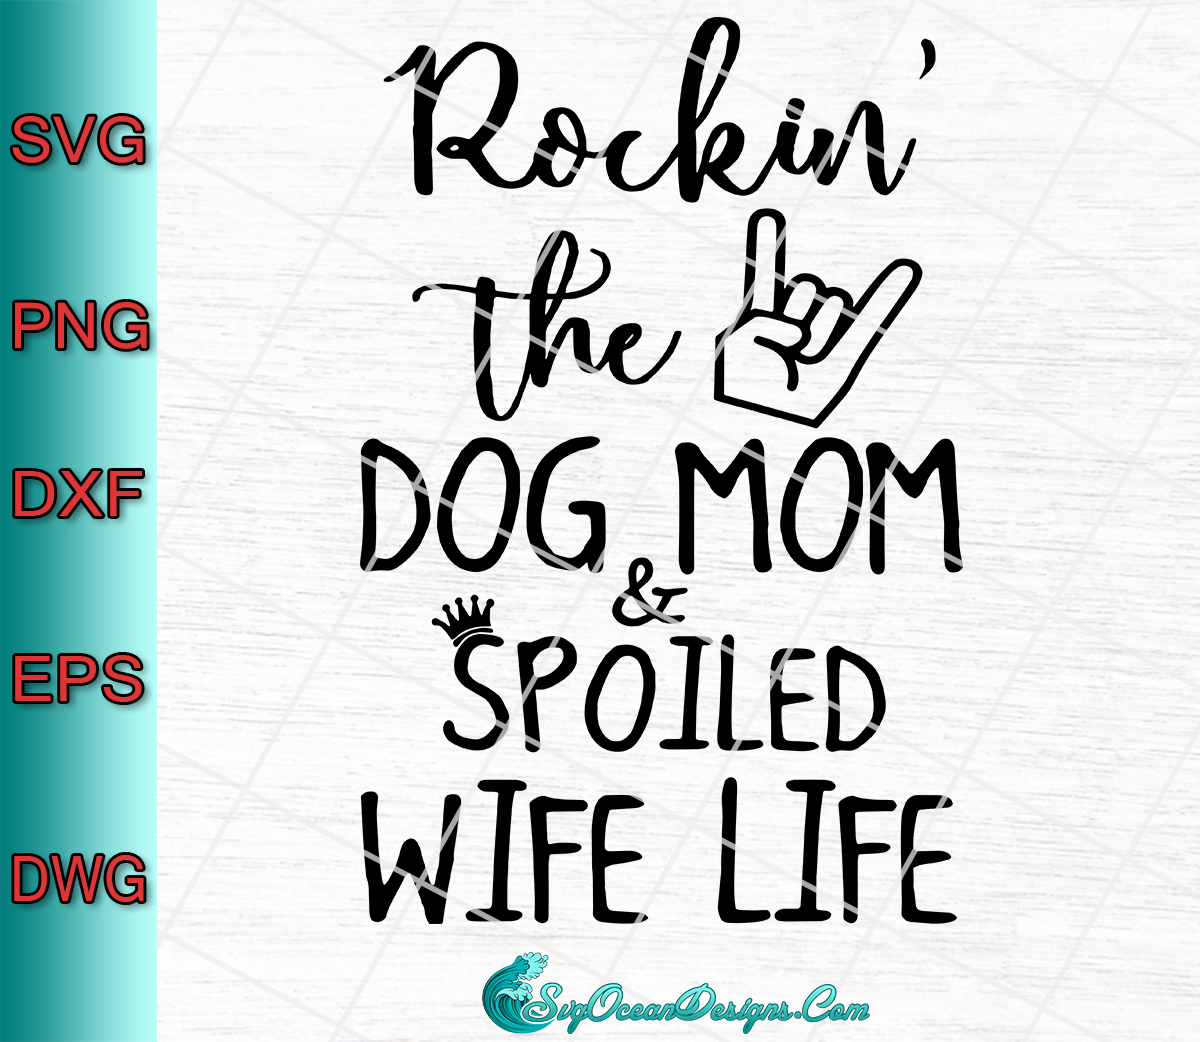 Download Rockin The Dog Mom And Spoiled Wife Life Svg Png Eps Dxf Designs Digital Download